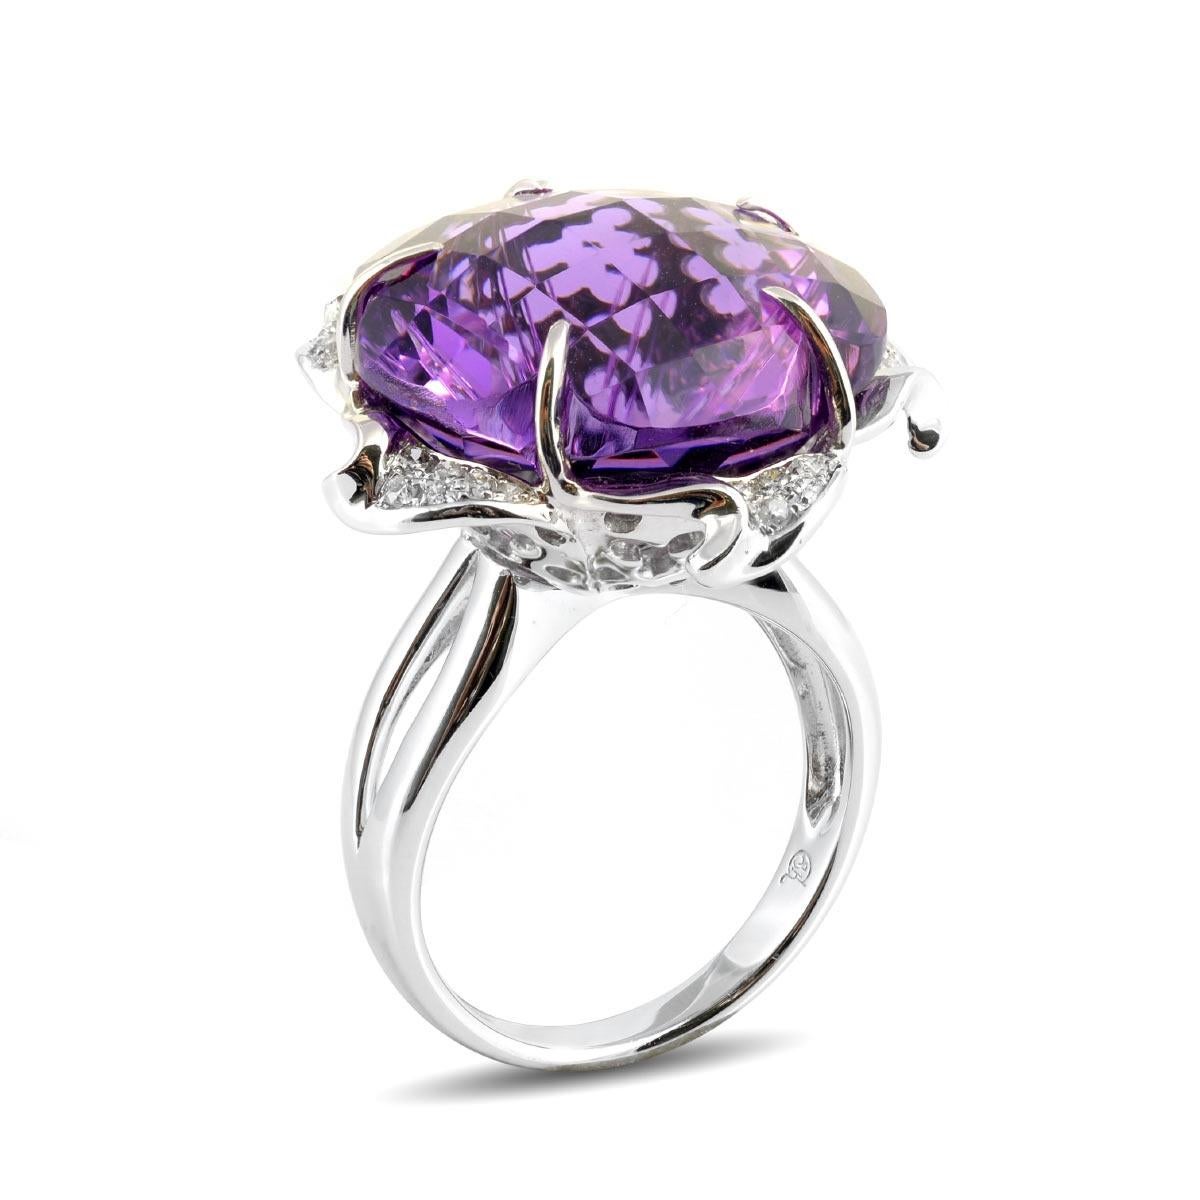 Introducing an exquisite ring adorned with a distinct checkerboard cut showcasing the deep and rich hues of aubergine Amethyst. The intricate cut mirrors the elegance of delicate petals, further accentuated by the embrace of diamonds set in 18K